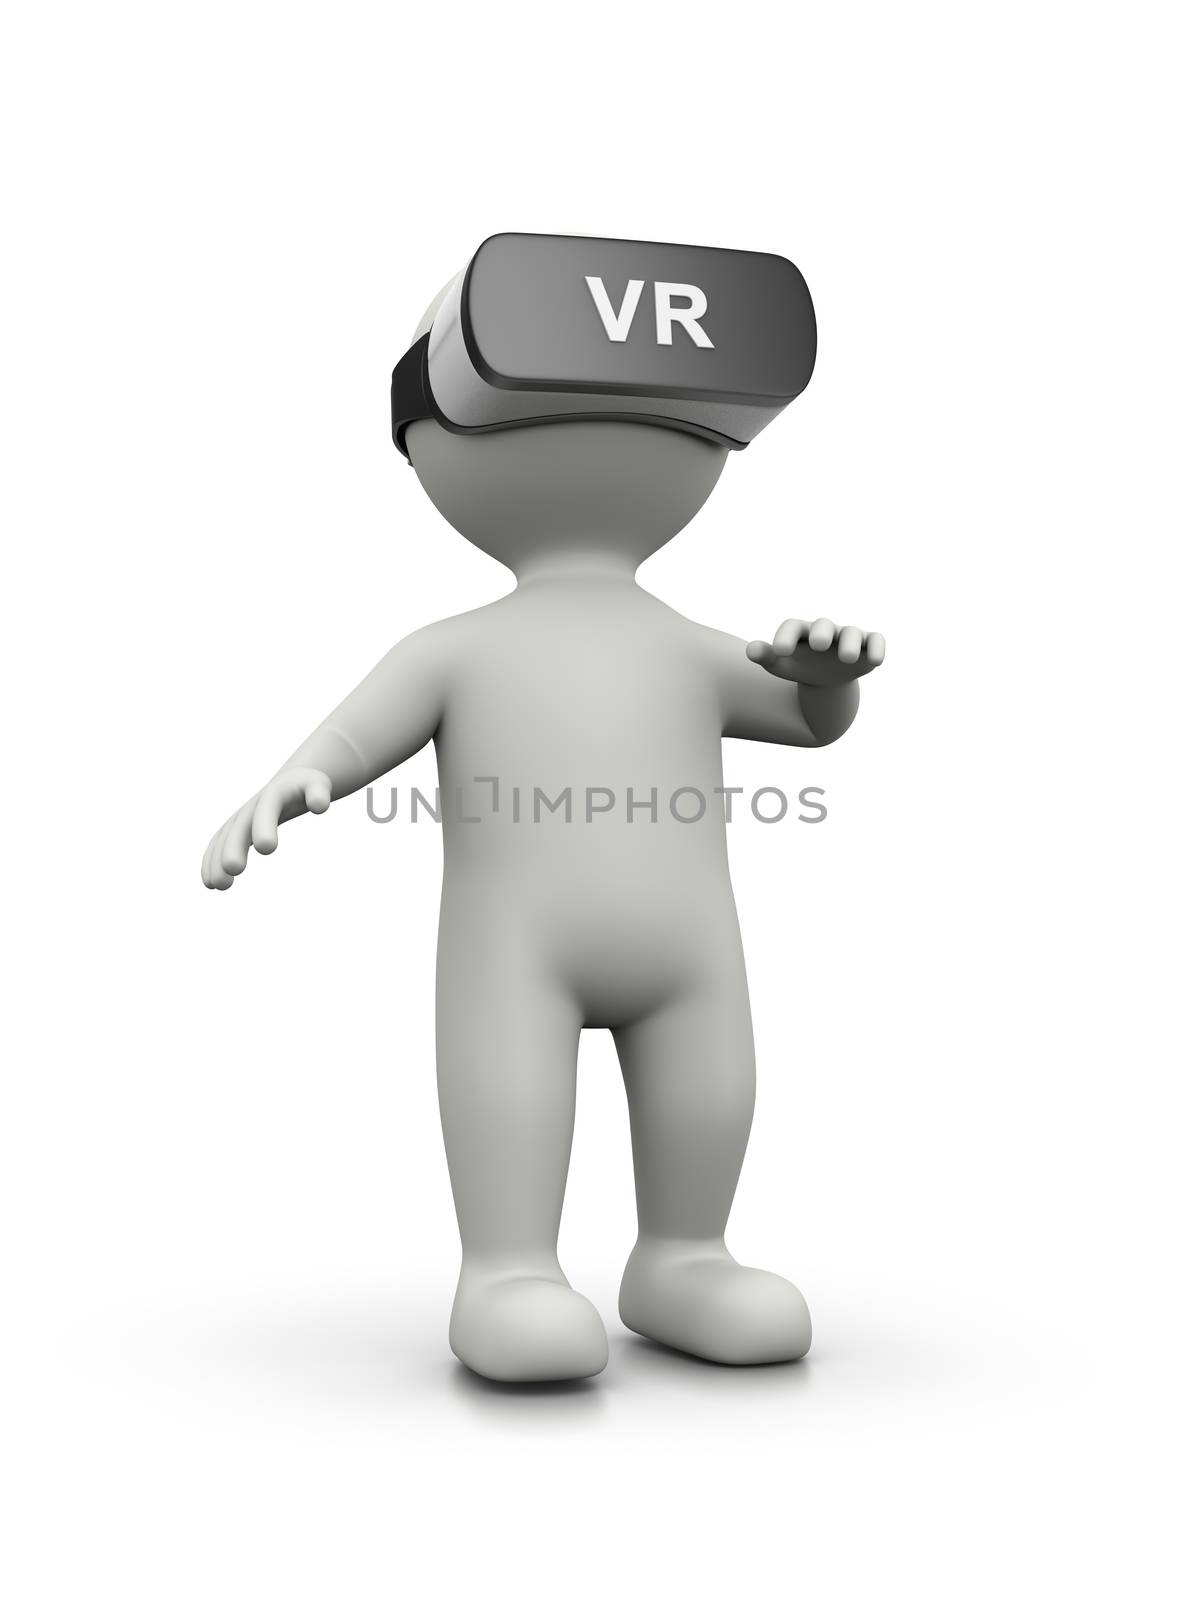 White 3D Character Wearing a VR Virtual Reality Headset 3D Illustration on White Background